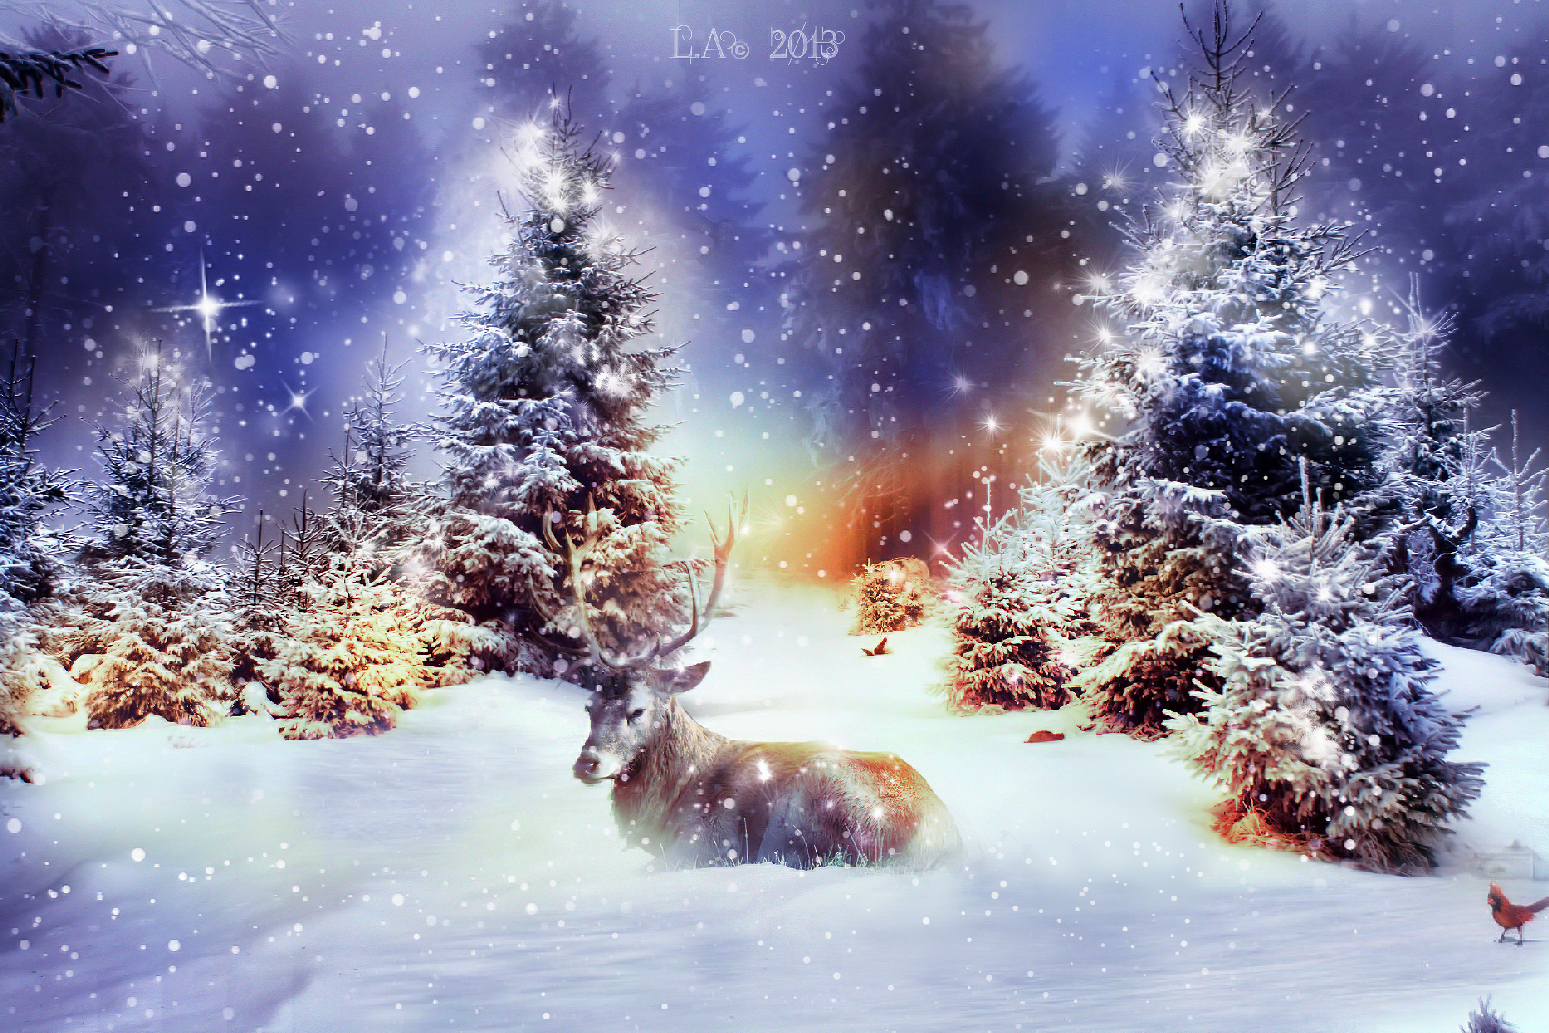 a winters tale (gateway to lapland )christmas time by la_wallpapers